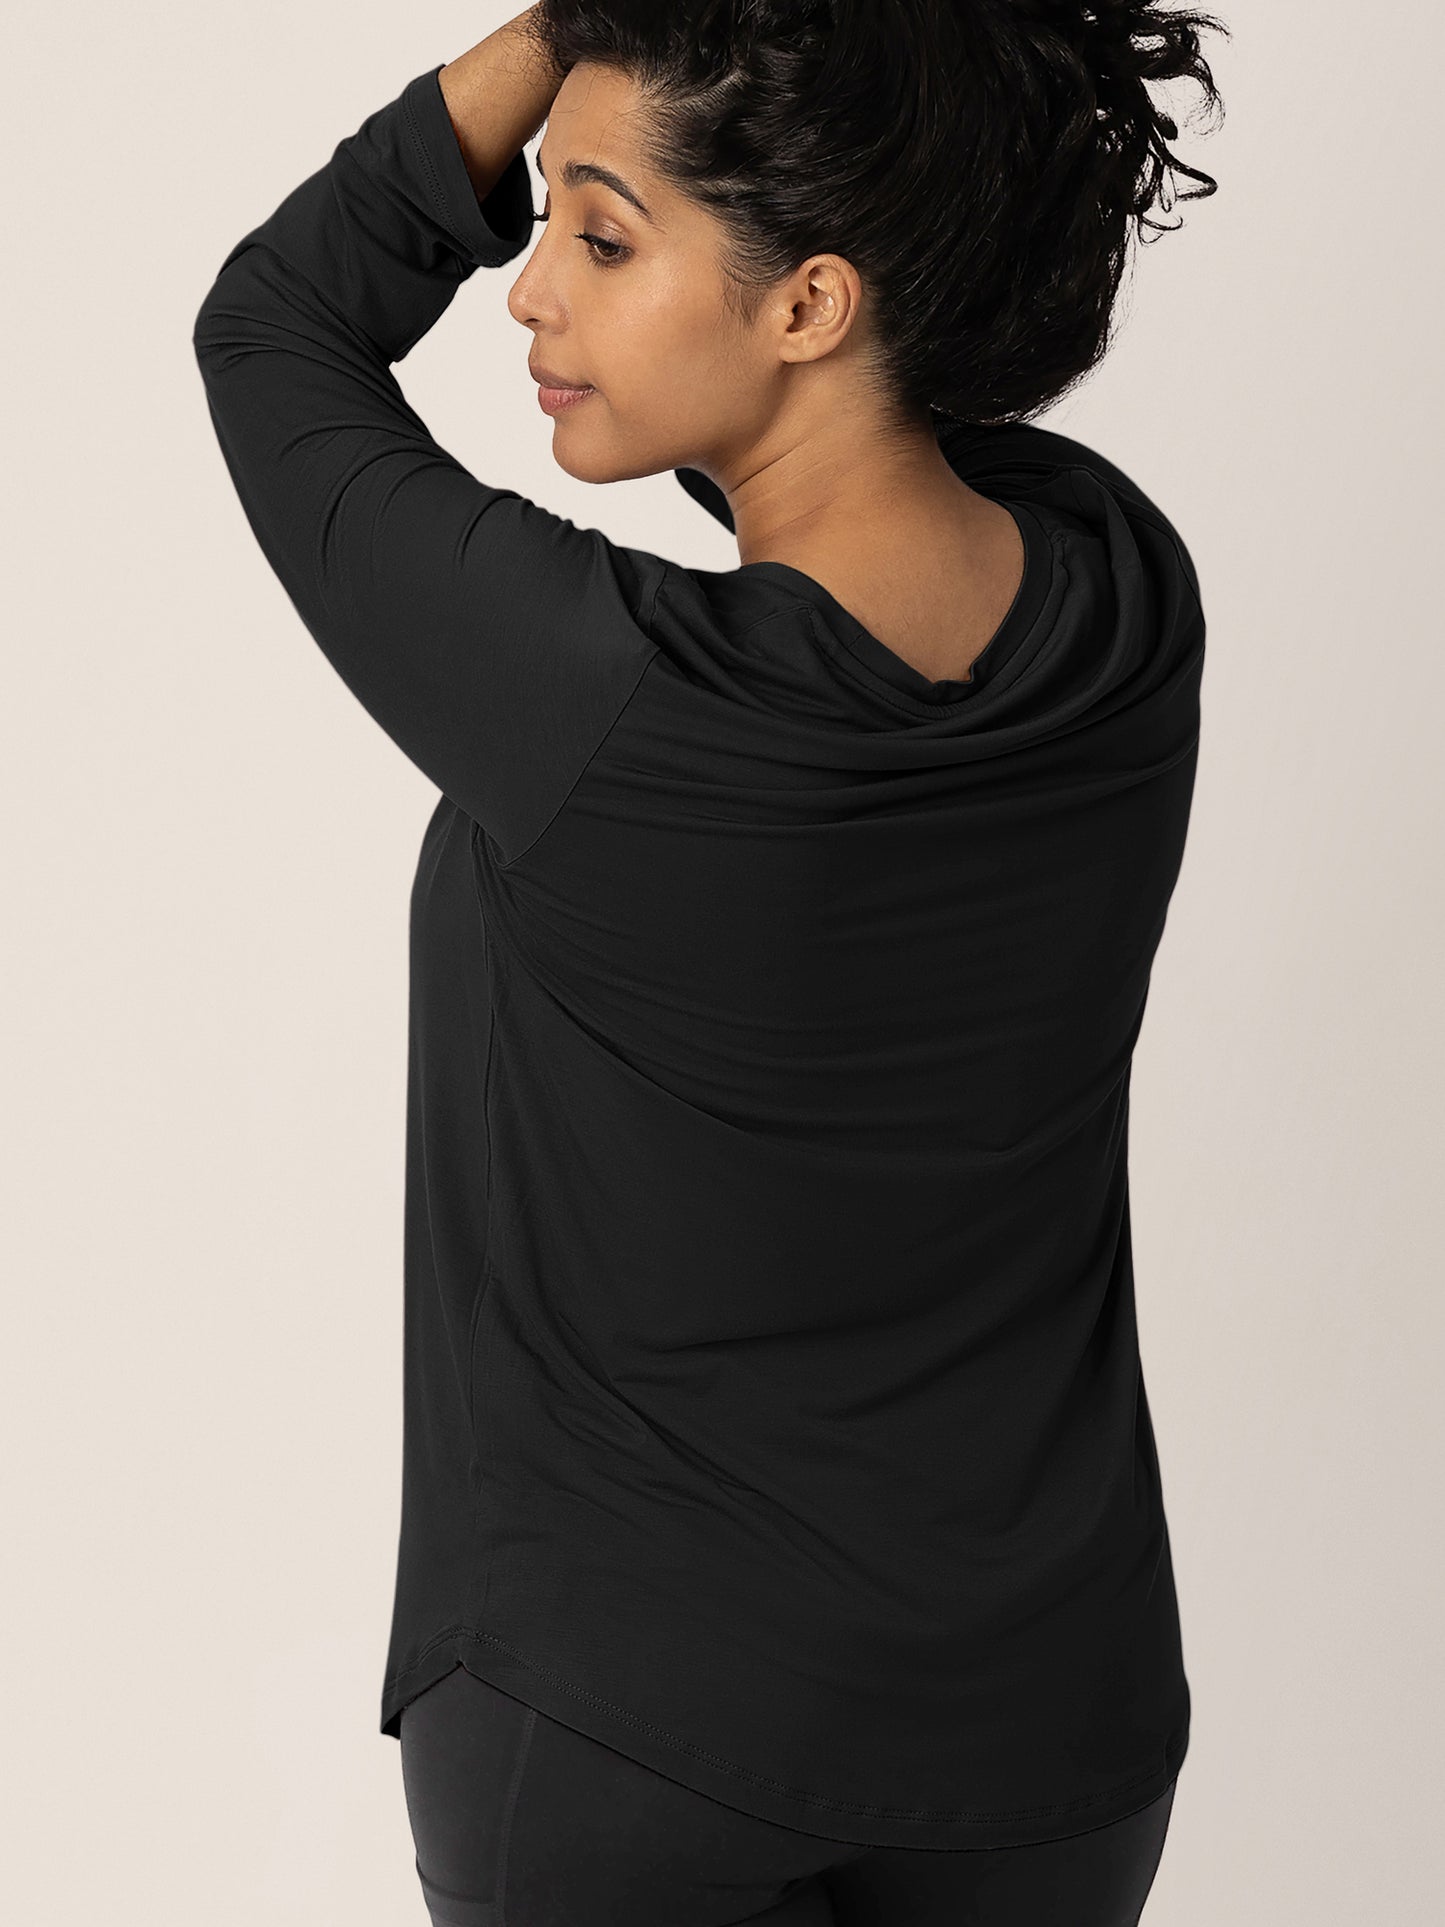 Back of a model wearing the Bamboo Maternity & Nursing Long Sleeve T-Shirt in Black with her hair up.